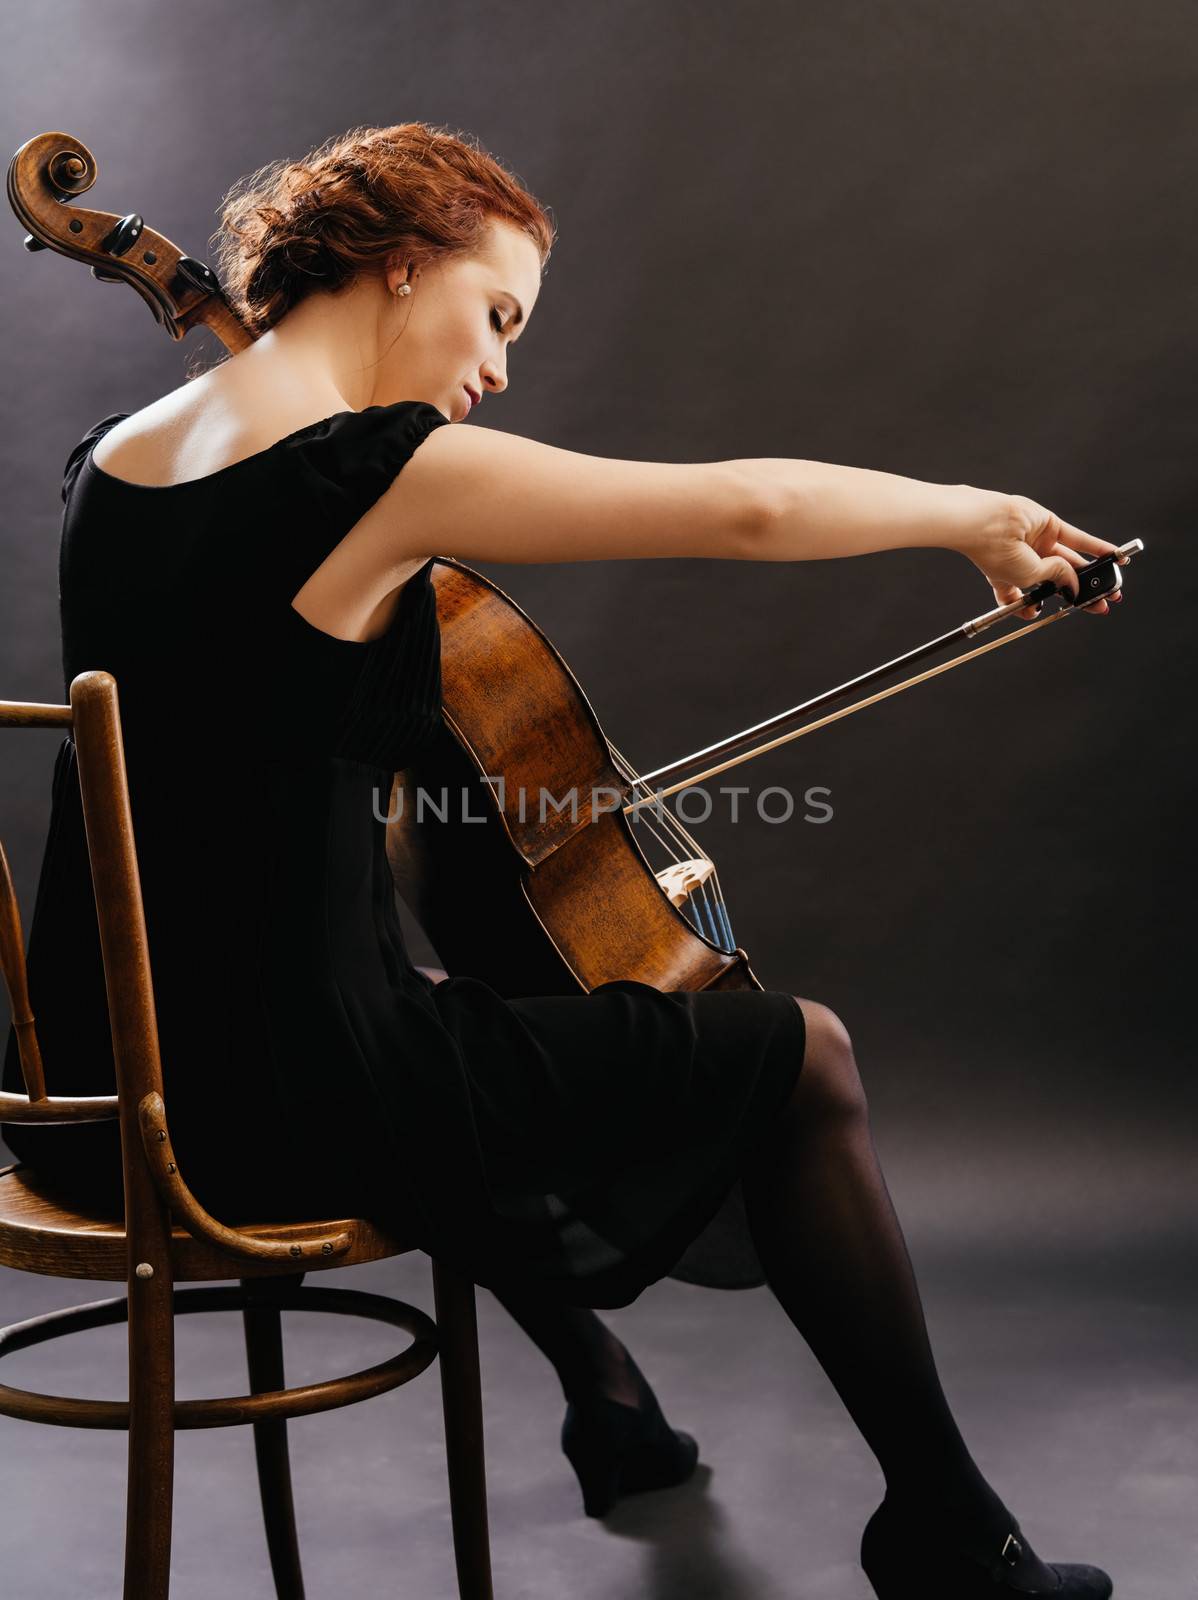 Photo of a beautiful woman playing a cello.